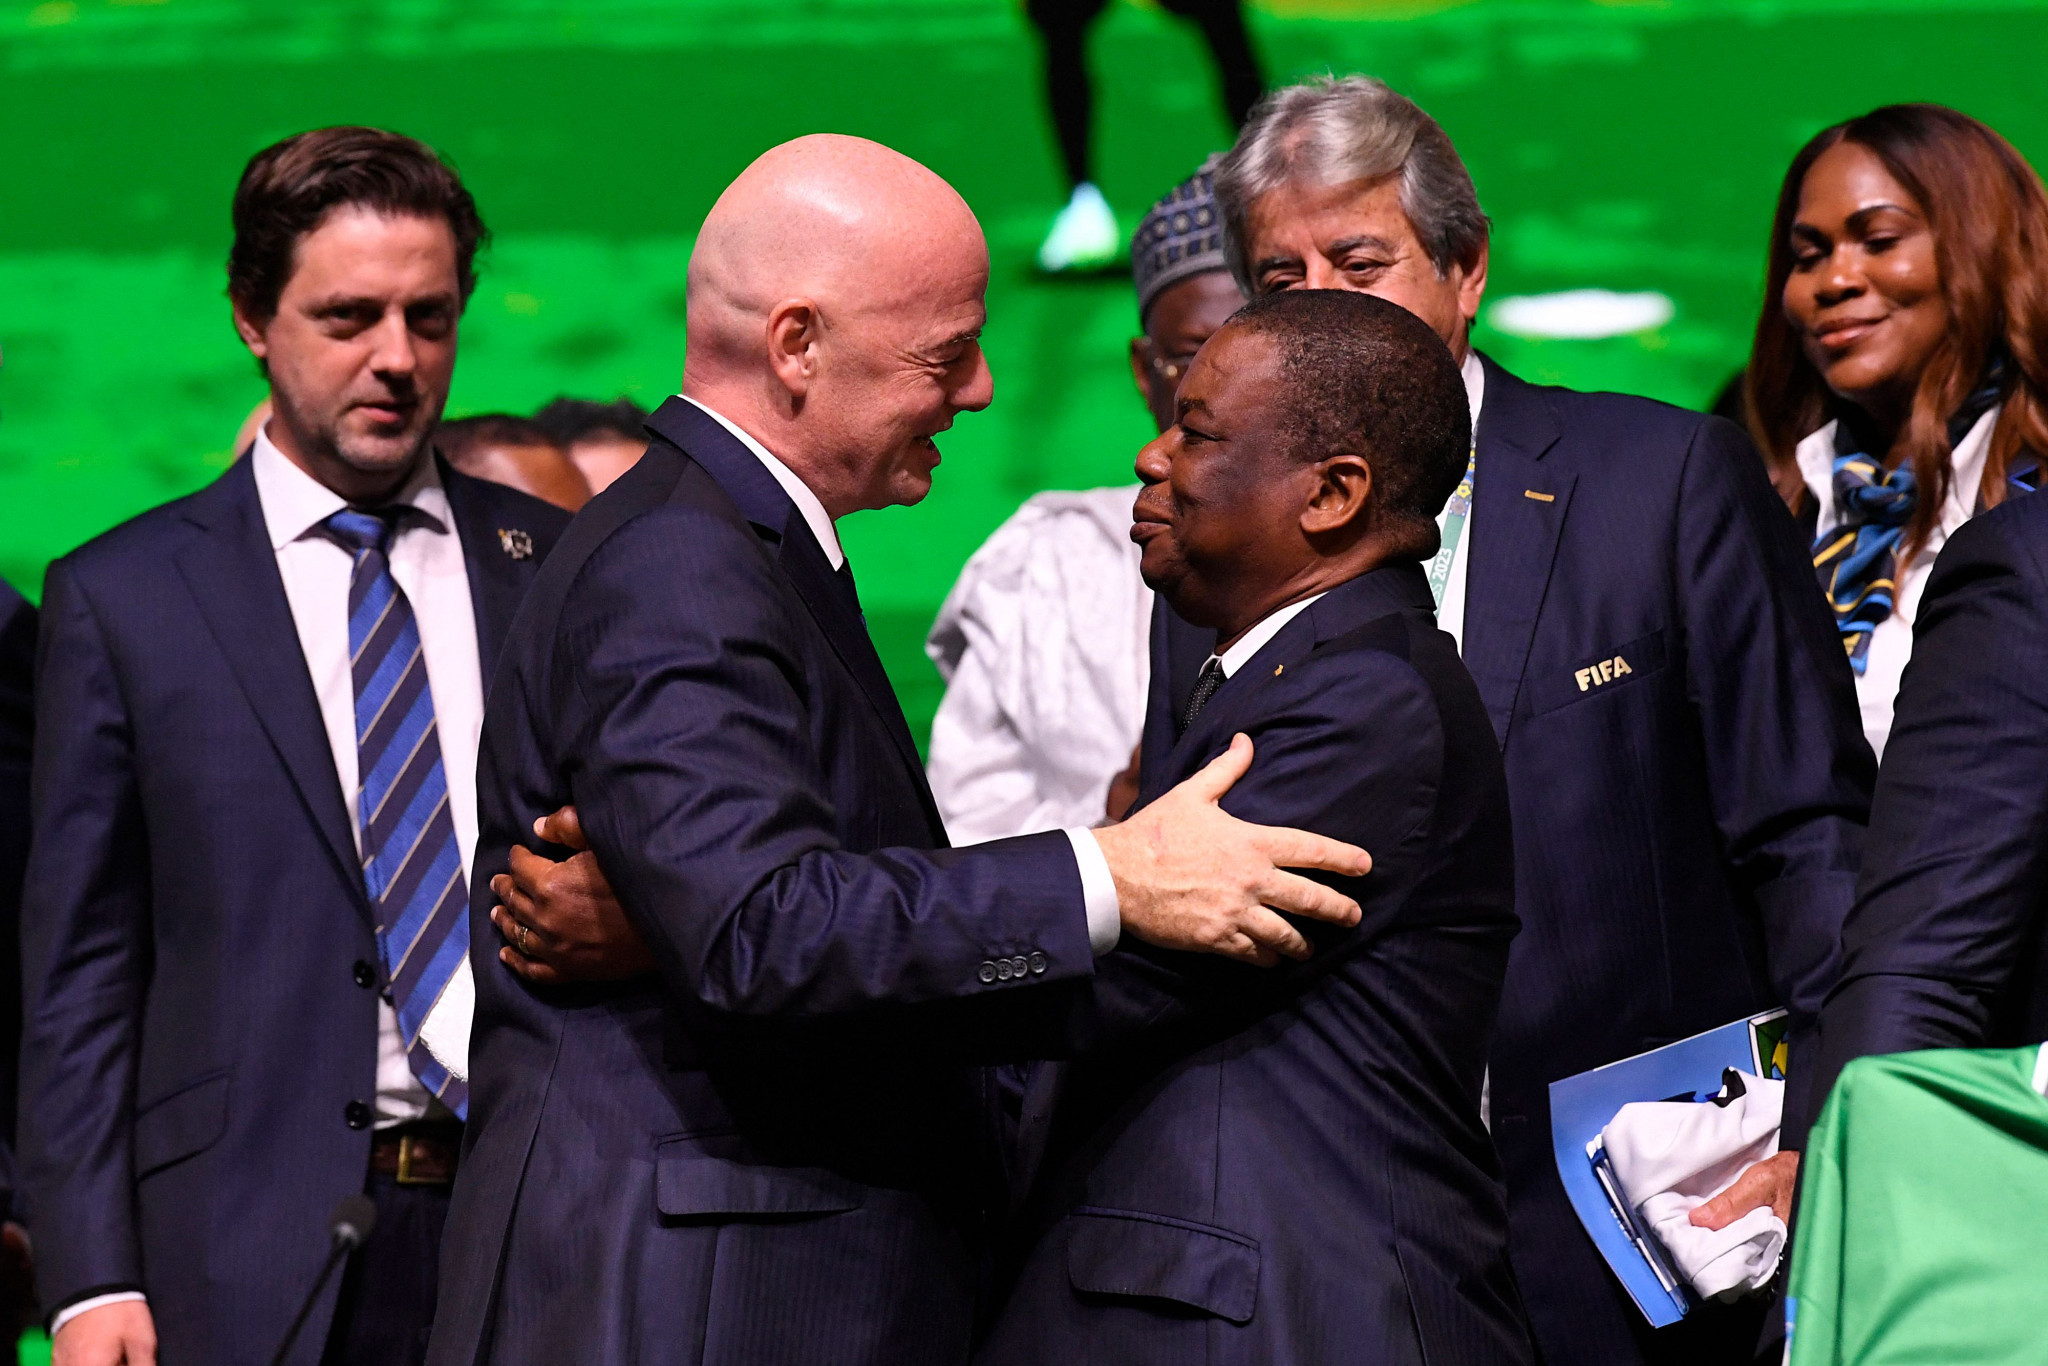 He was congratulated by delegates after FIFA secretary general Fatma Samoura's outburst, exclaiming 